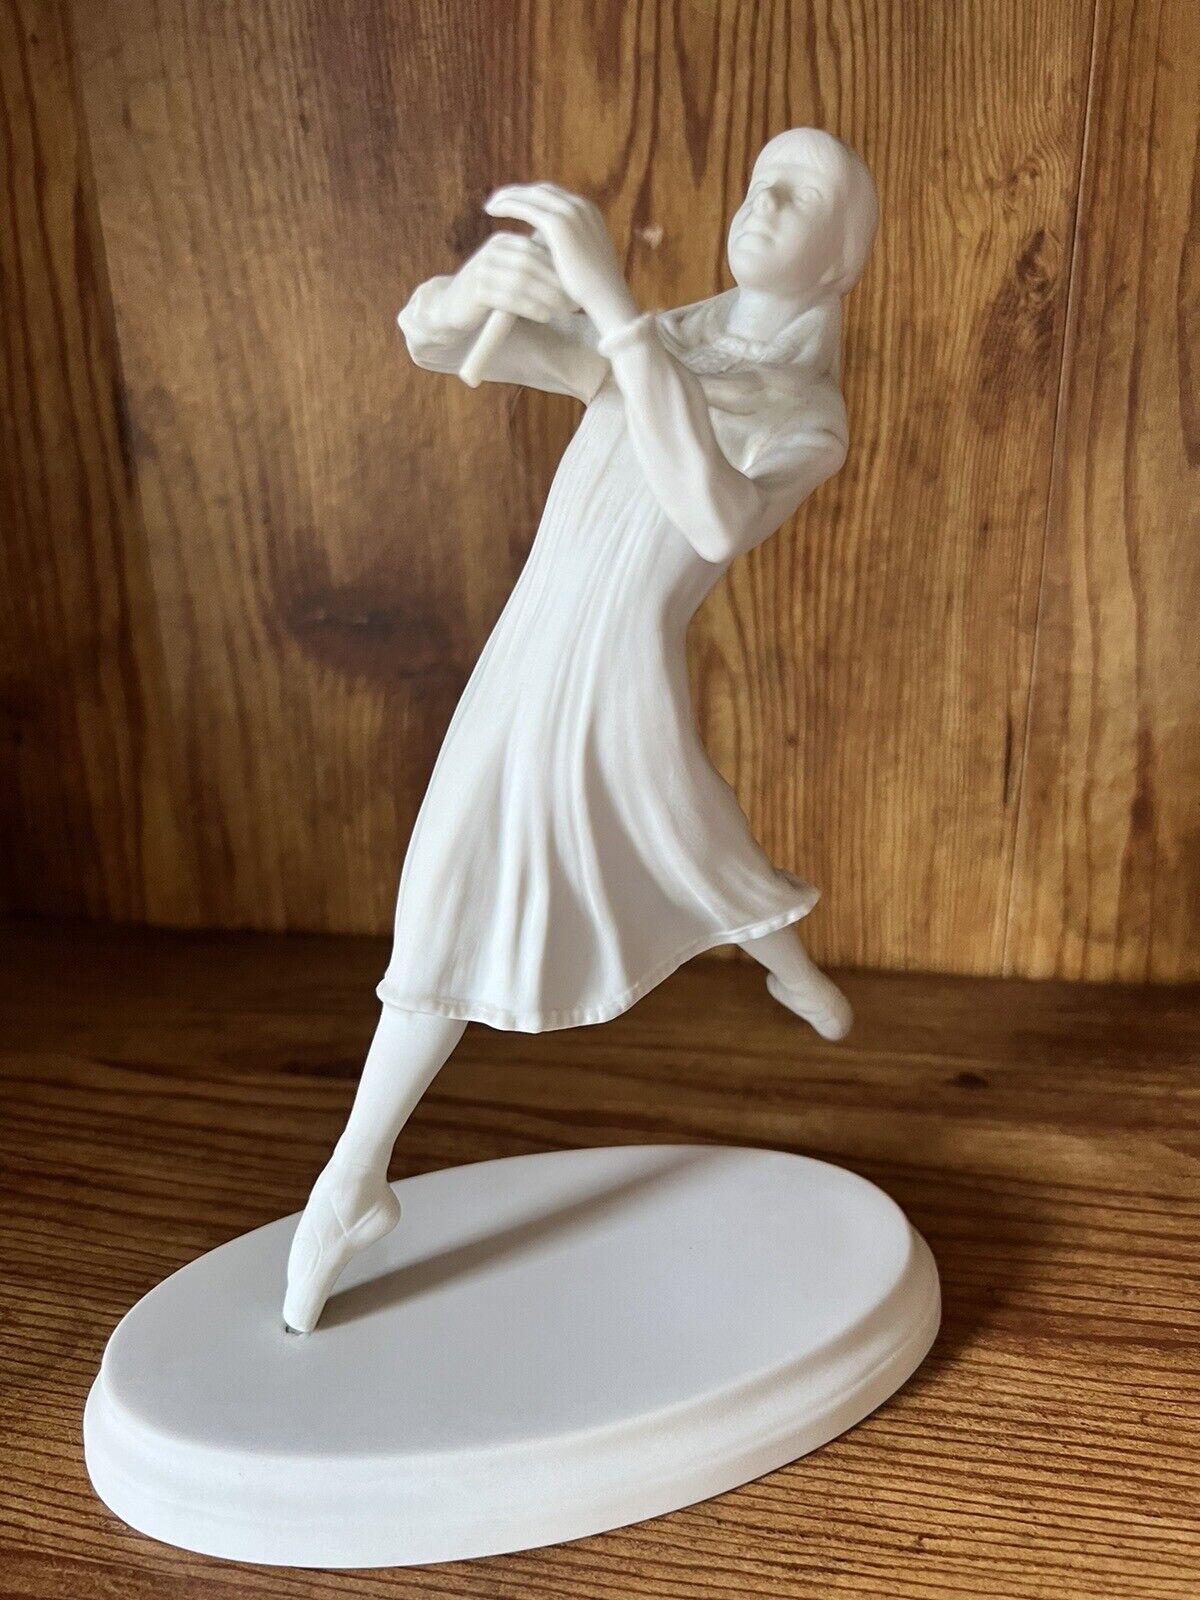 Boehm Bisque Porcelain Ballet Collection Figurine The American Ballet Theater